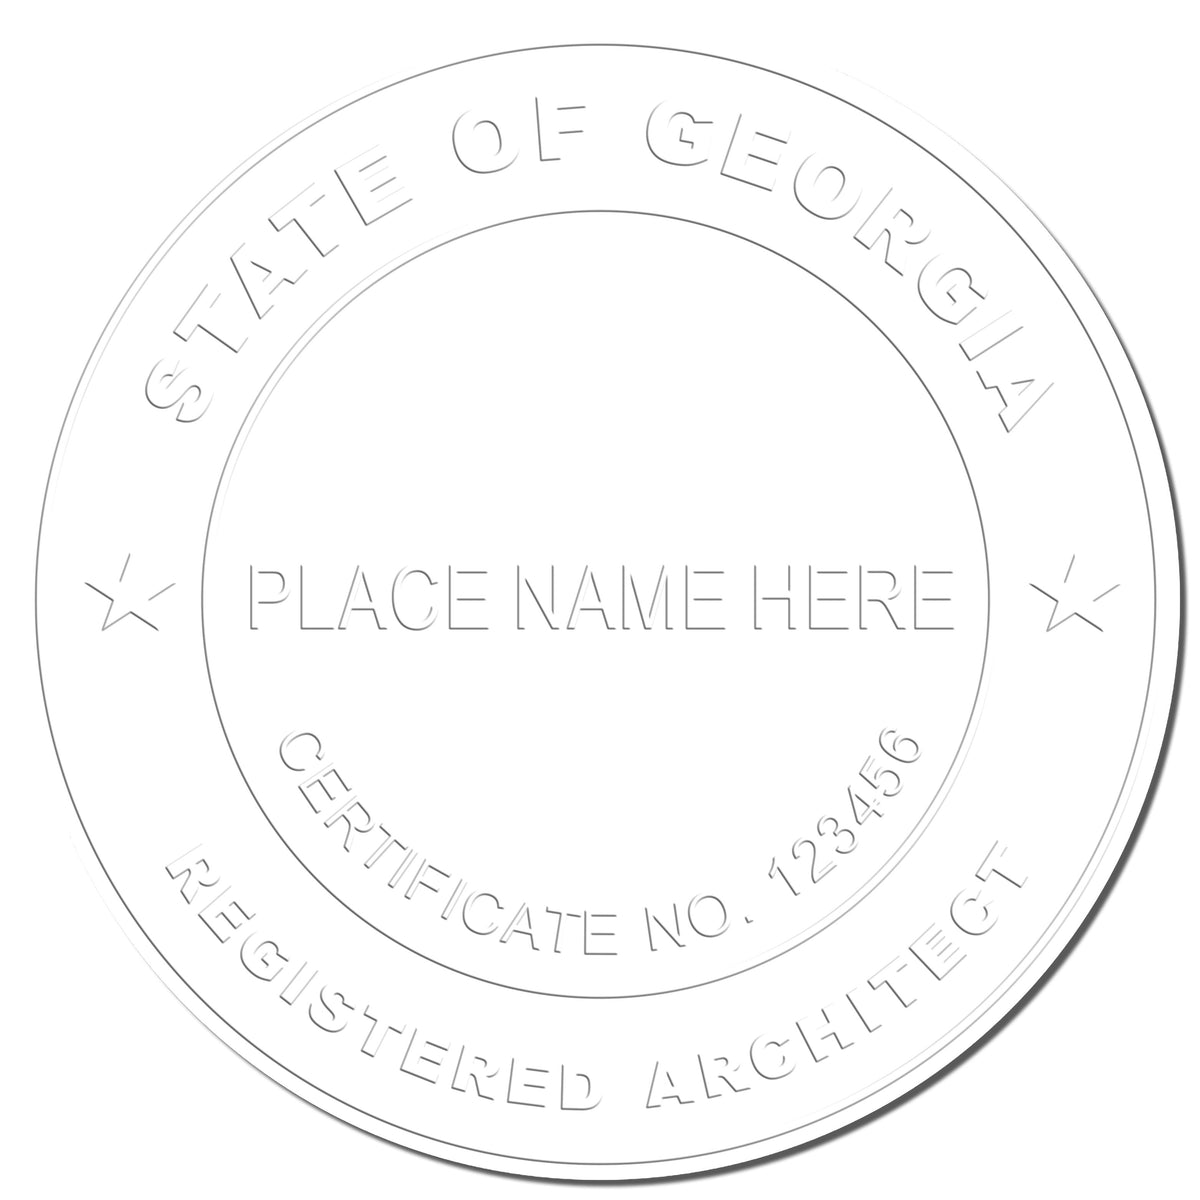 This paper is stamped with a sample imprint of the Hybrid Georgia Architect Seal, signifying its quality and reliability.